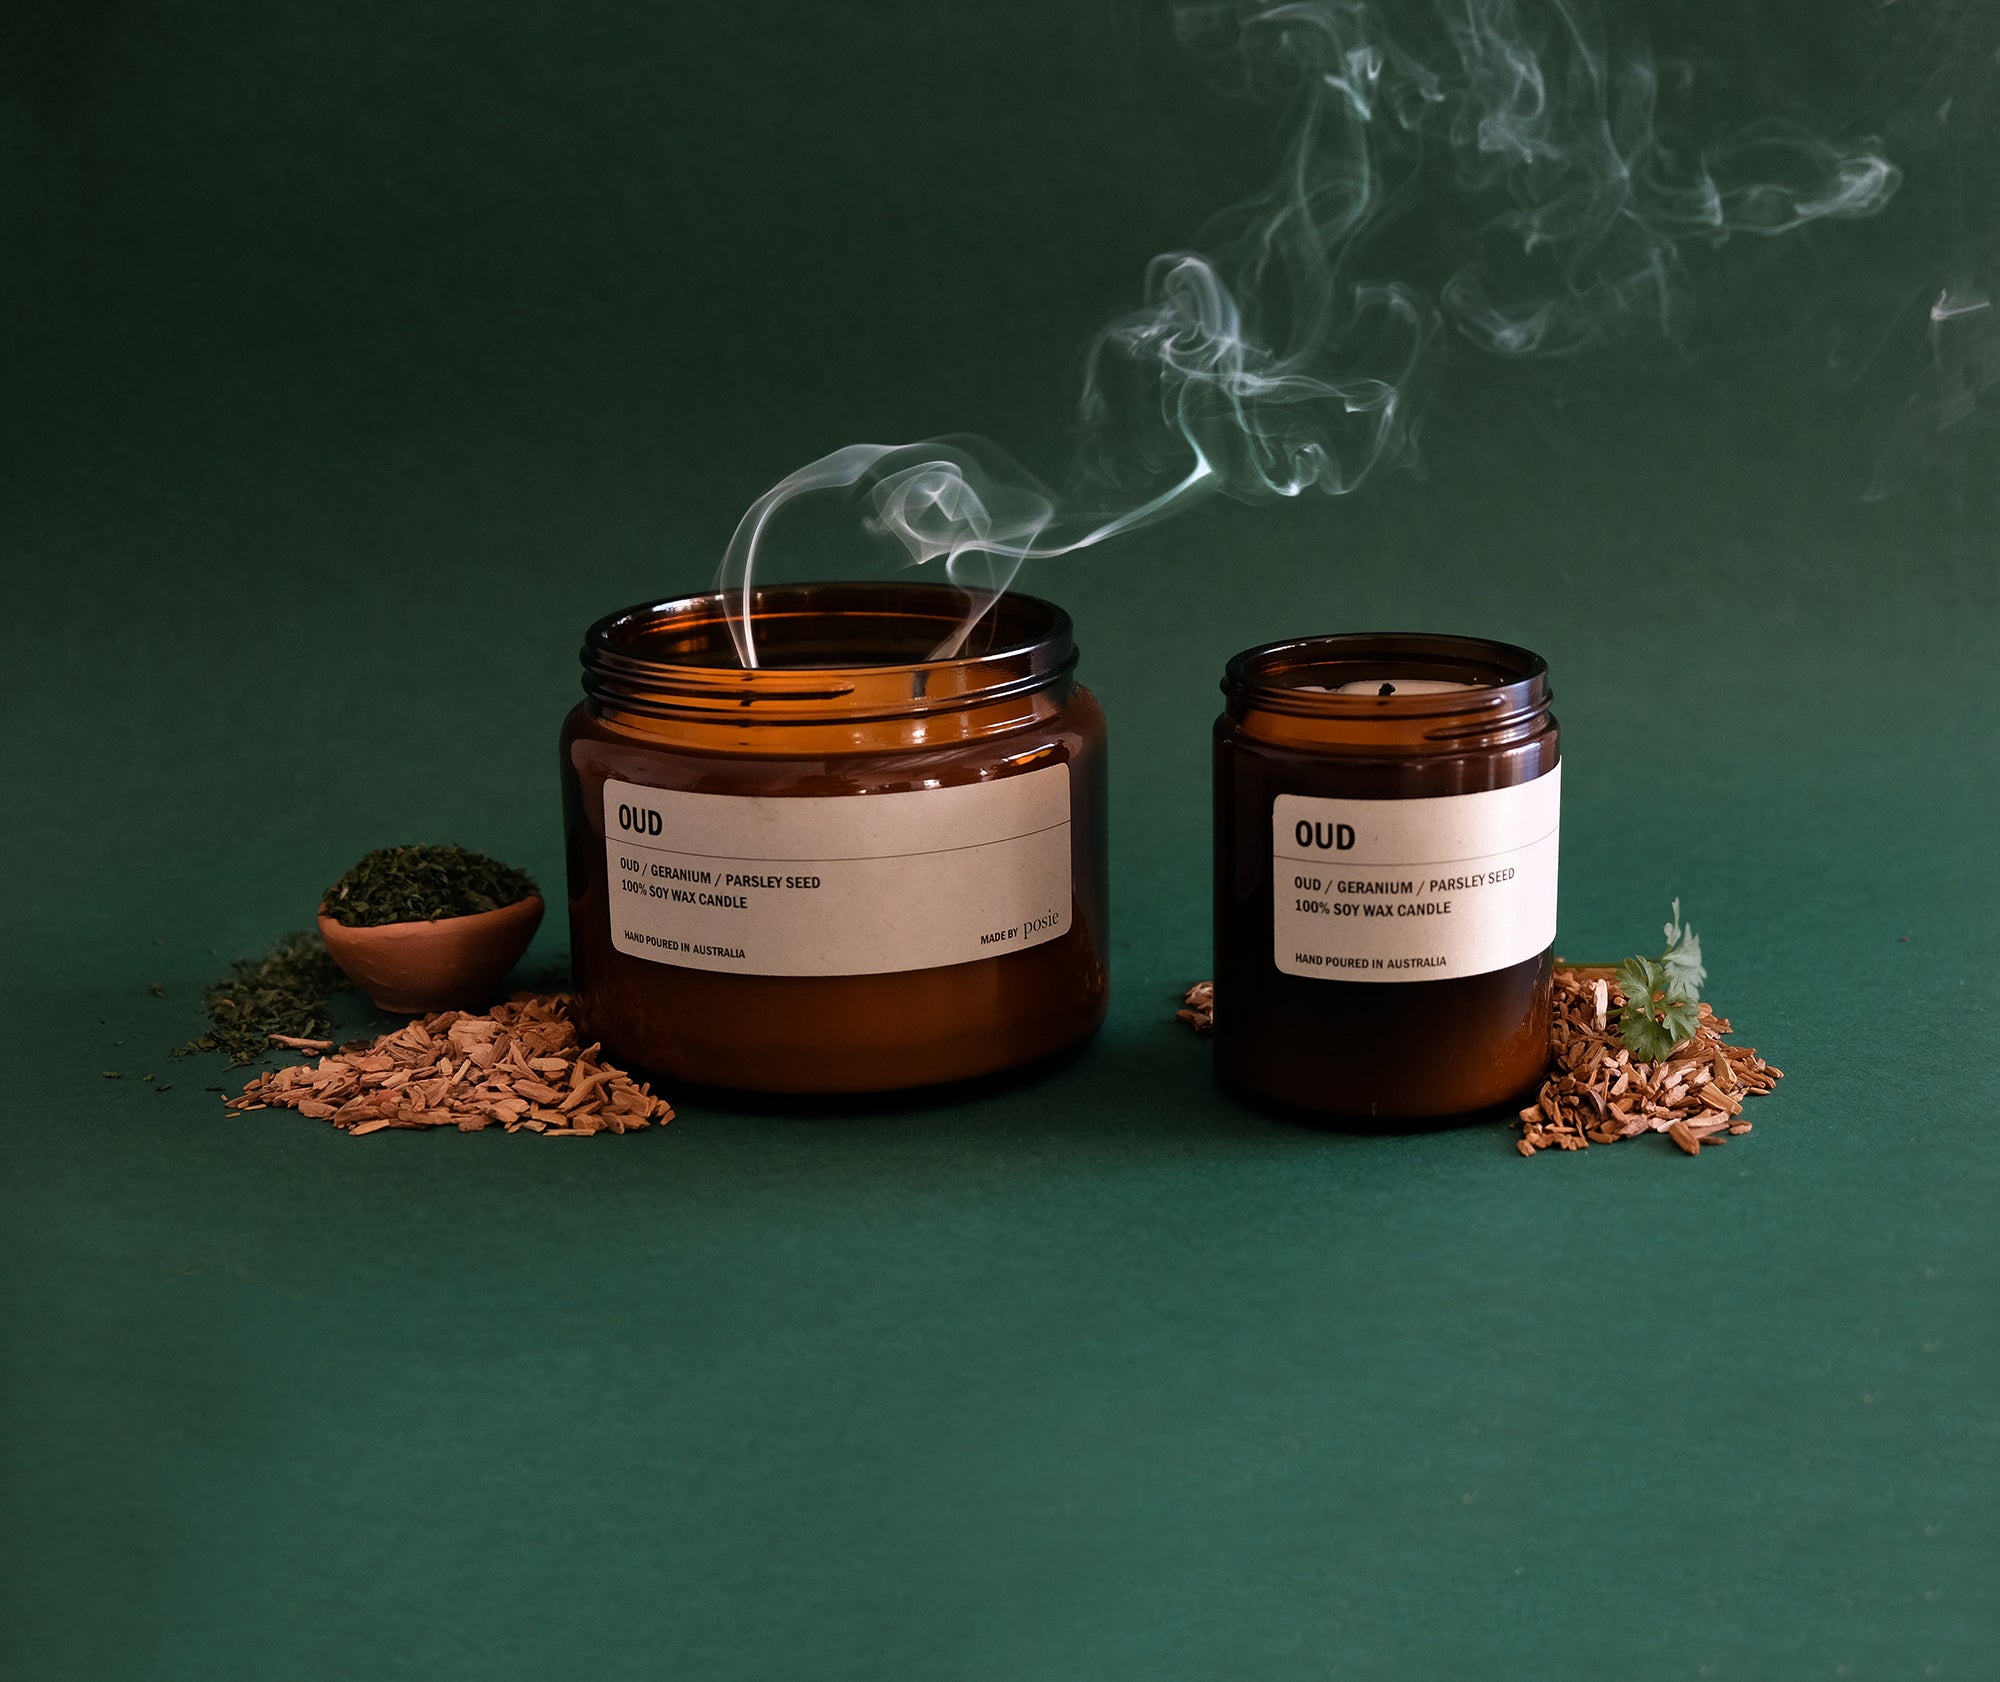 OUD: Oud Wood / Geranium / Parsley Seed Large Amber Candle 500g